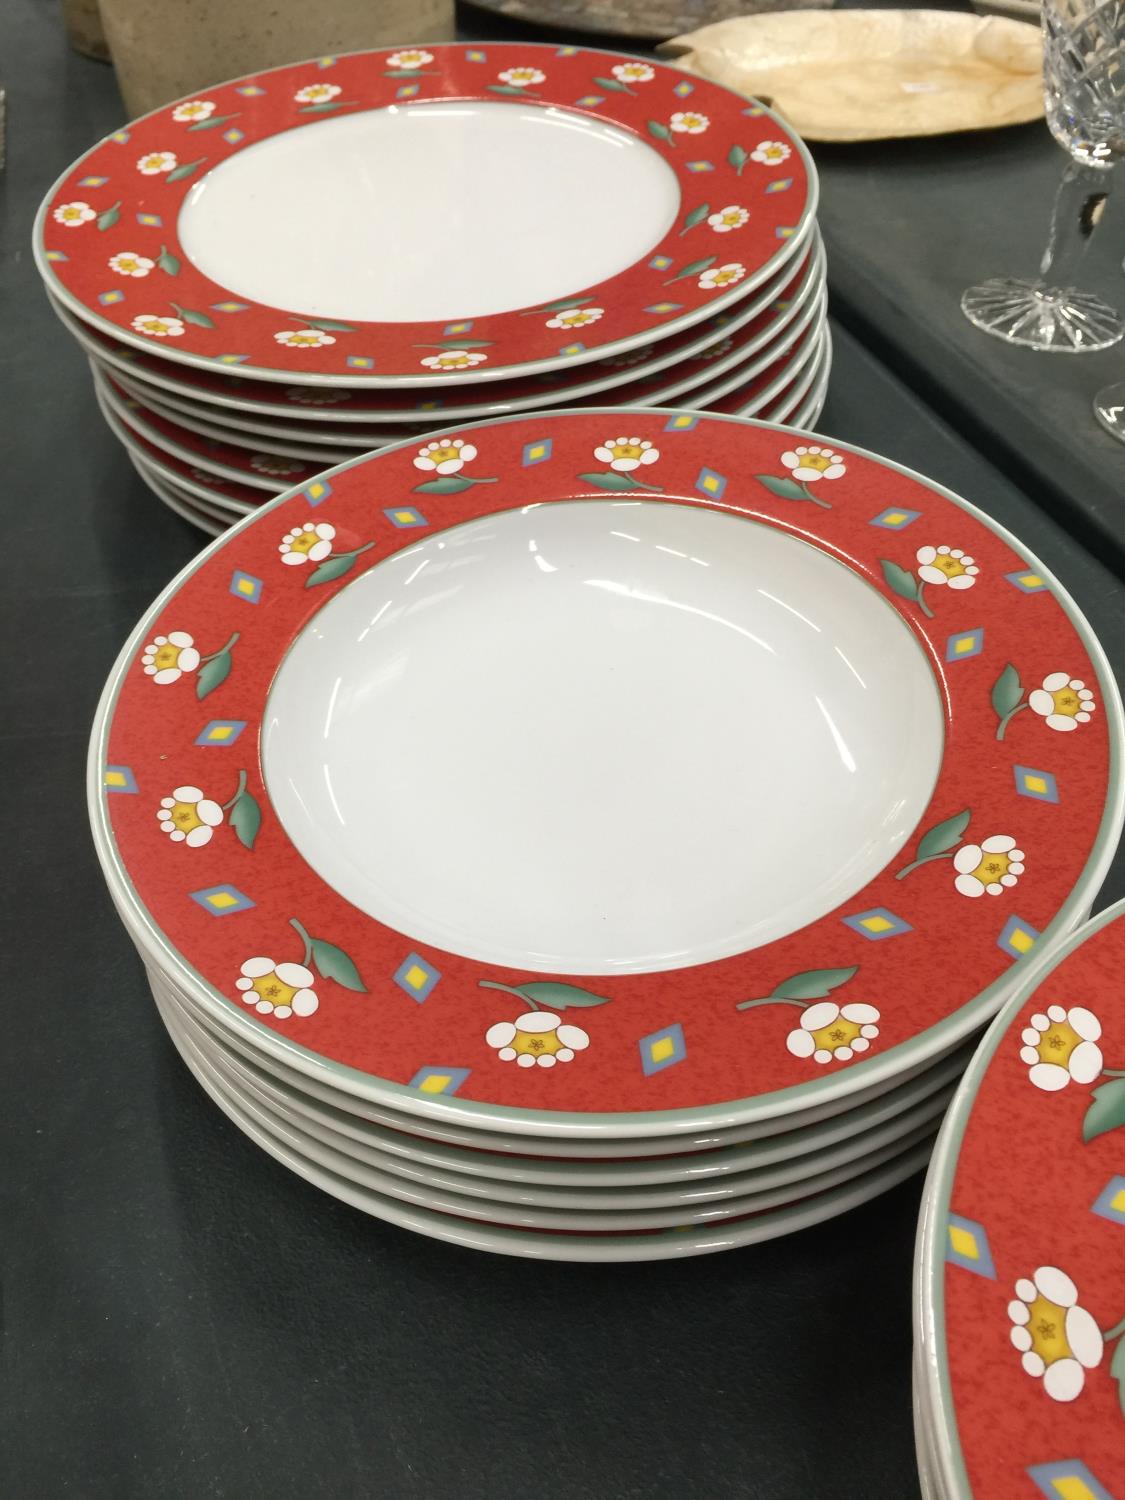 A QUANTITY OF VILLEROY & BOCH SMALL, MEDIUM AND LARGE PLATES PLUS BOWLS - Image 2 of 3